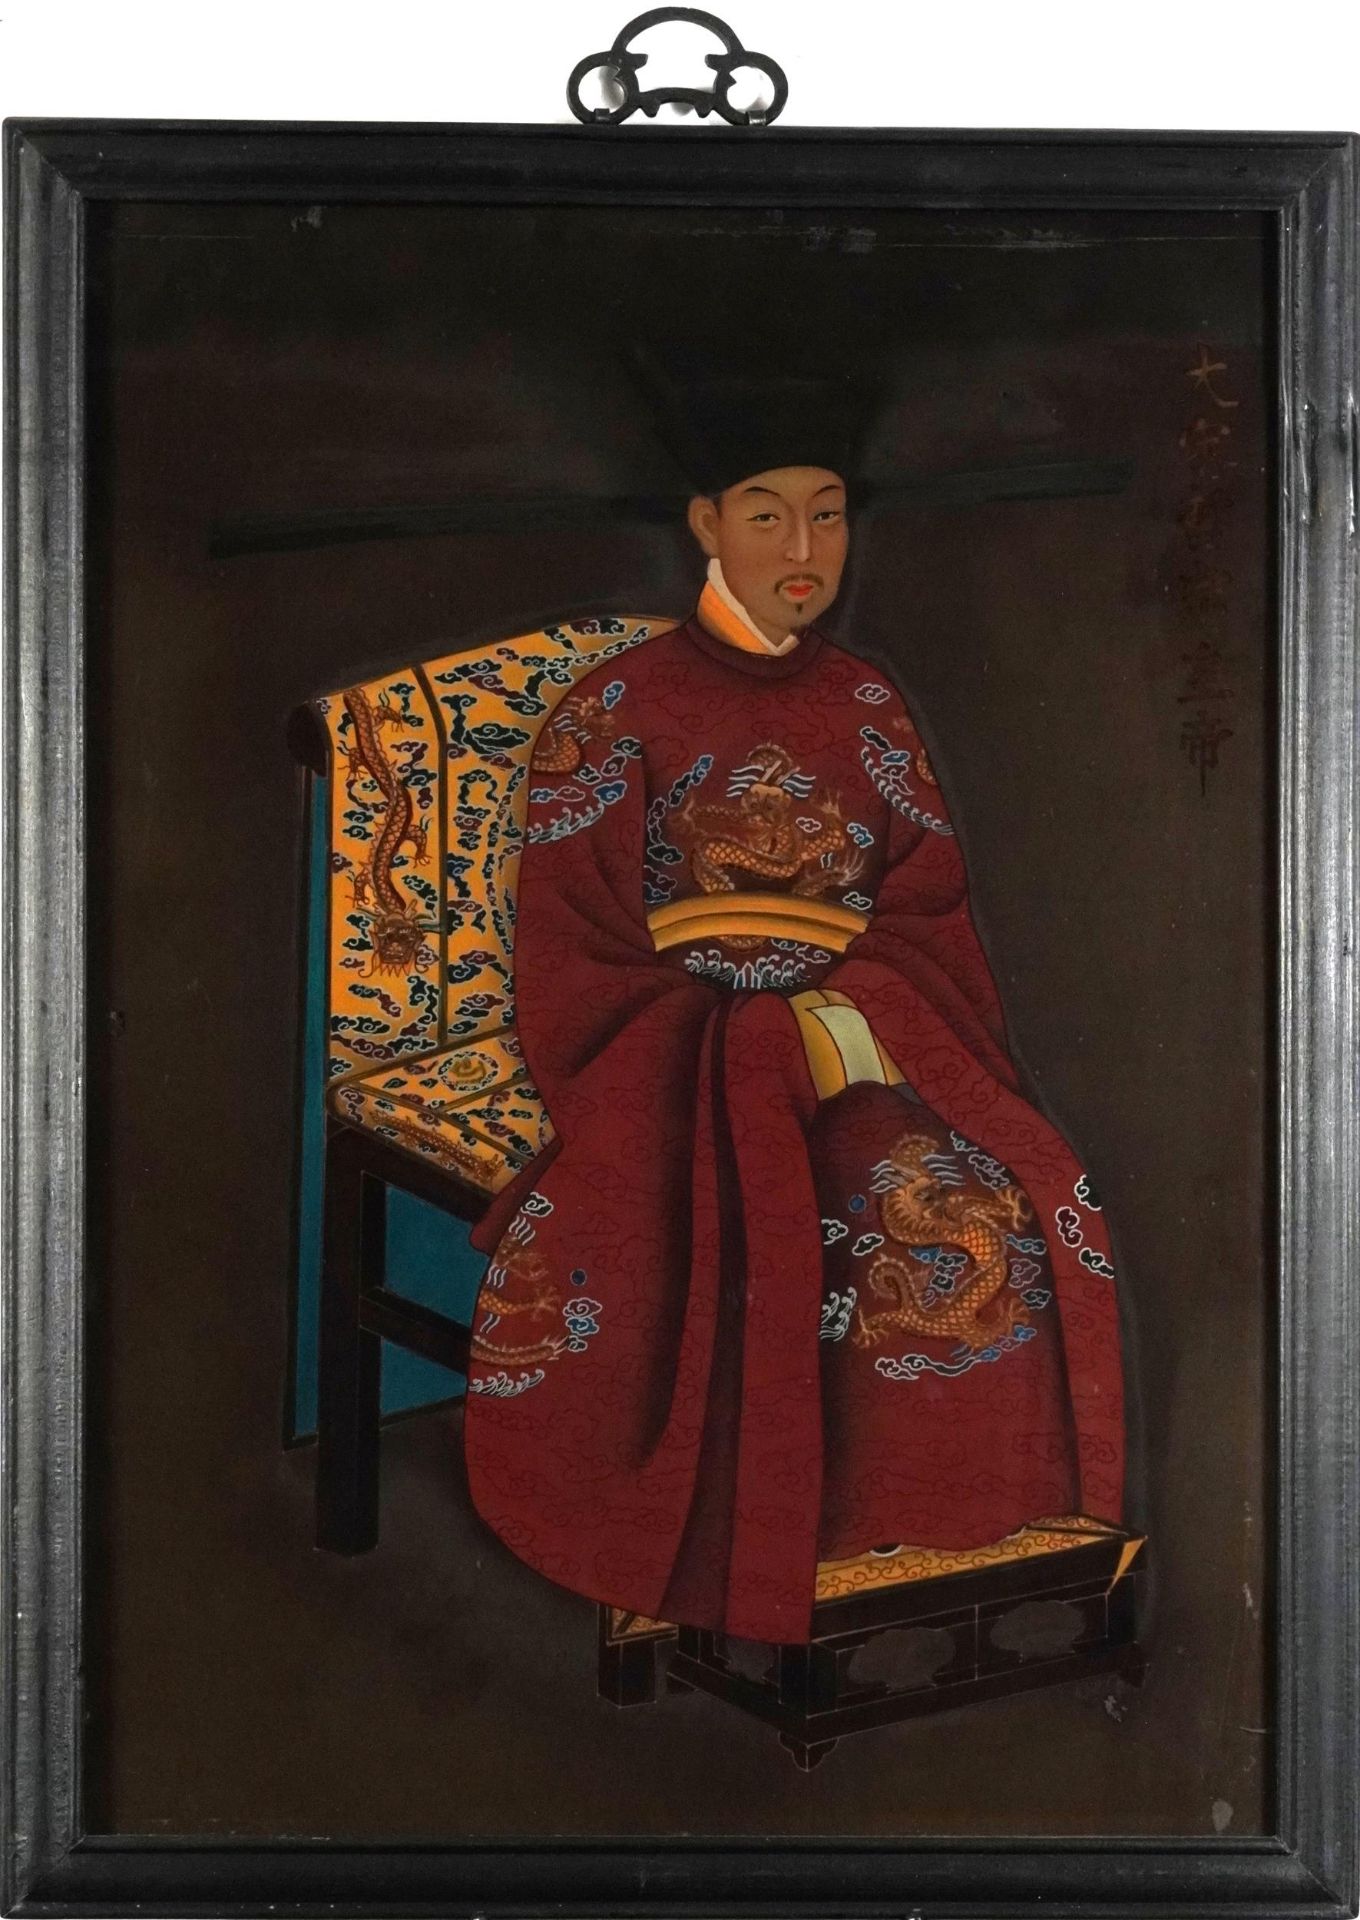 Ancestral portrait of a ruler, Chinese reverse glass painting with calligraphy housed in a - Image 2 of 4